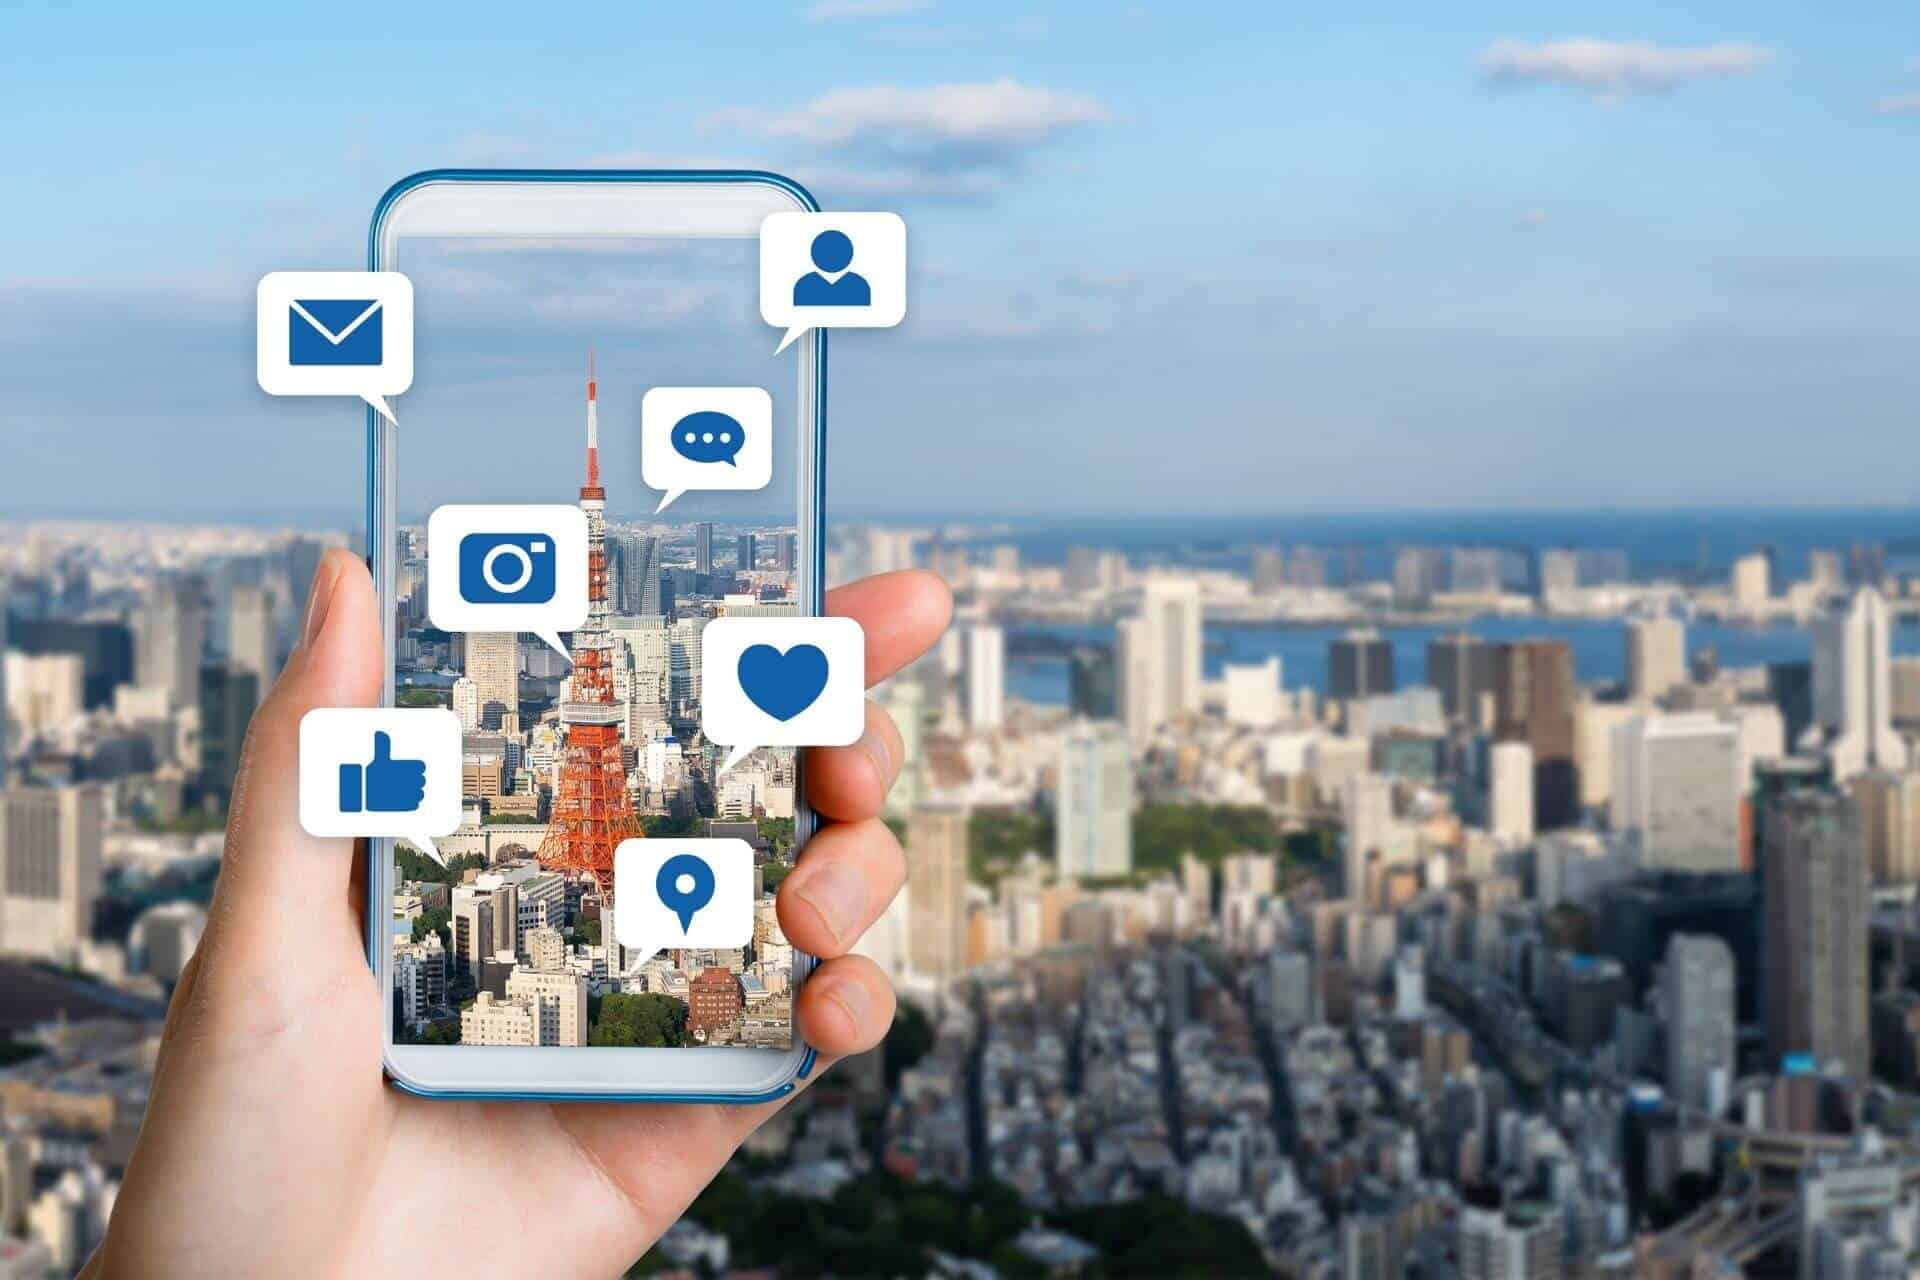 A mobile phone displaying social media icons against a cityscape 